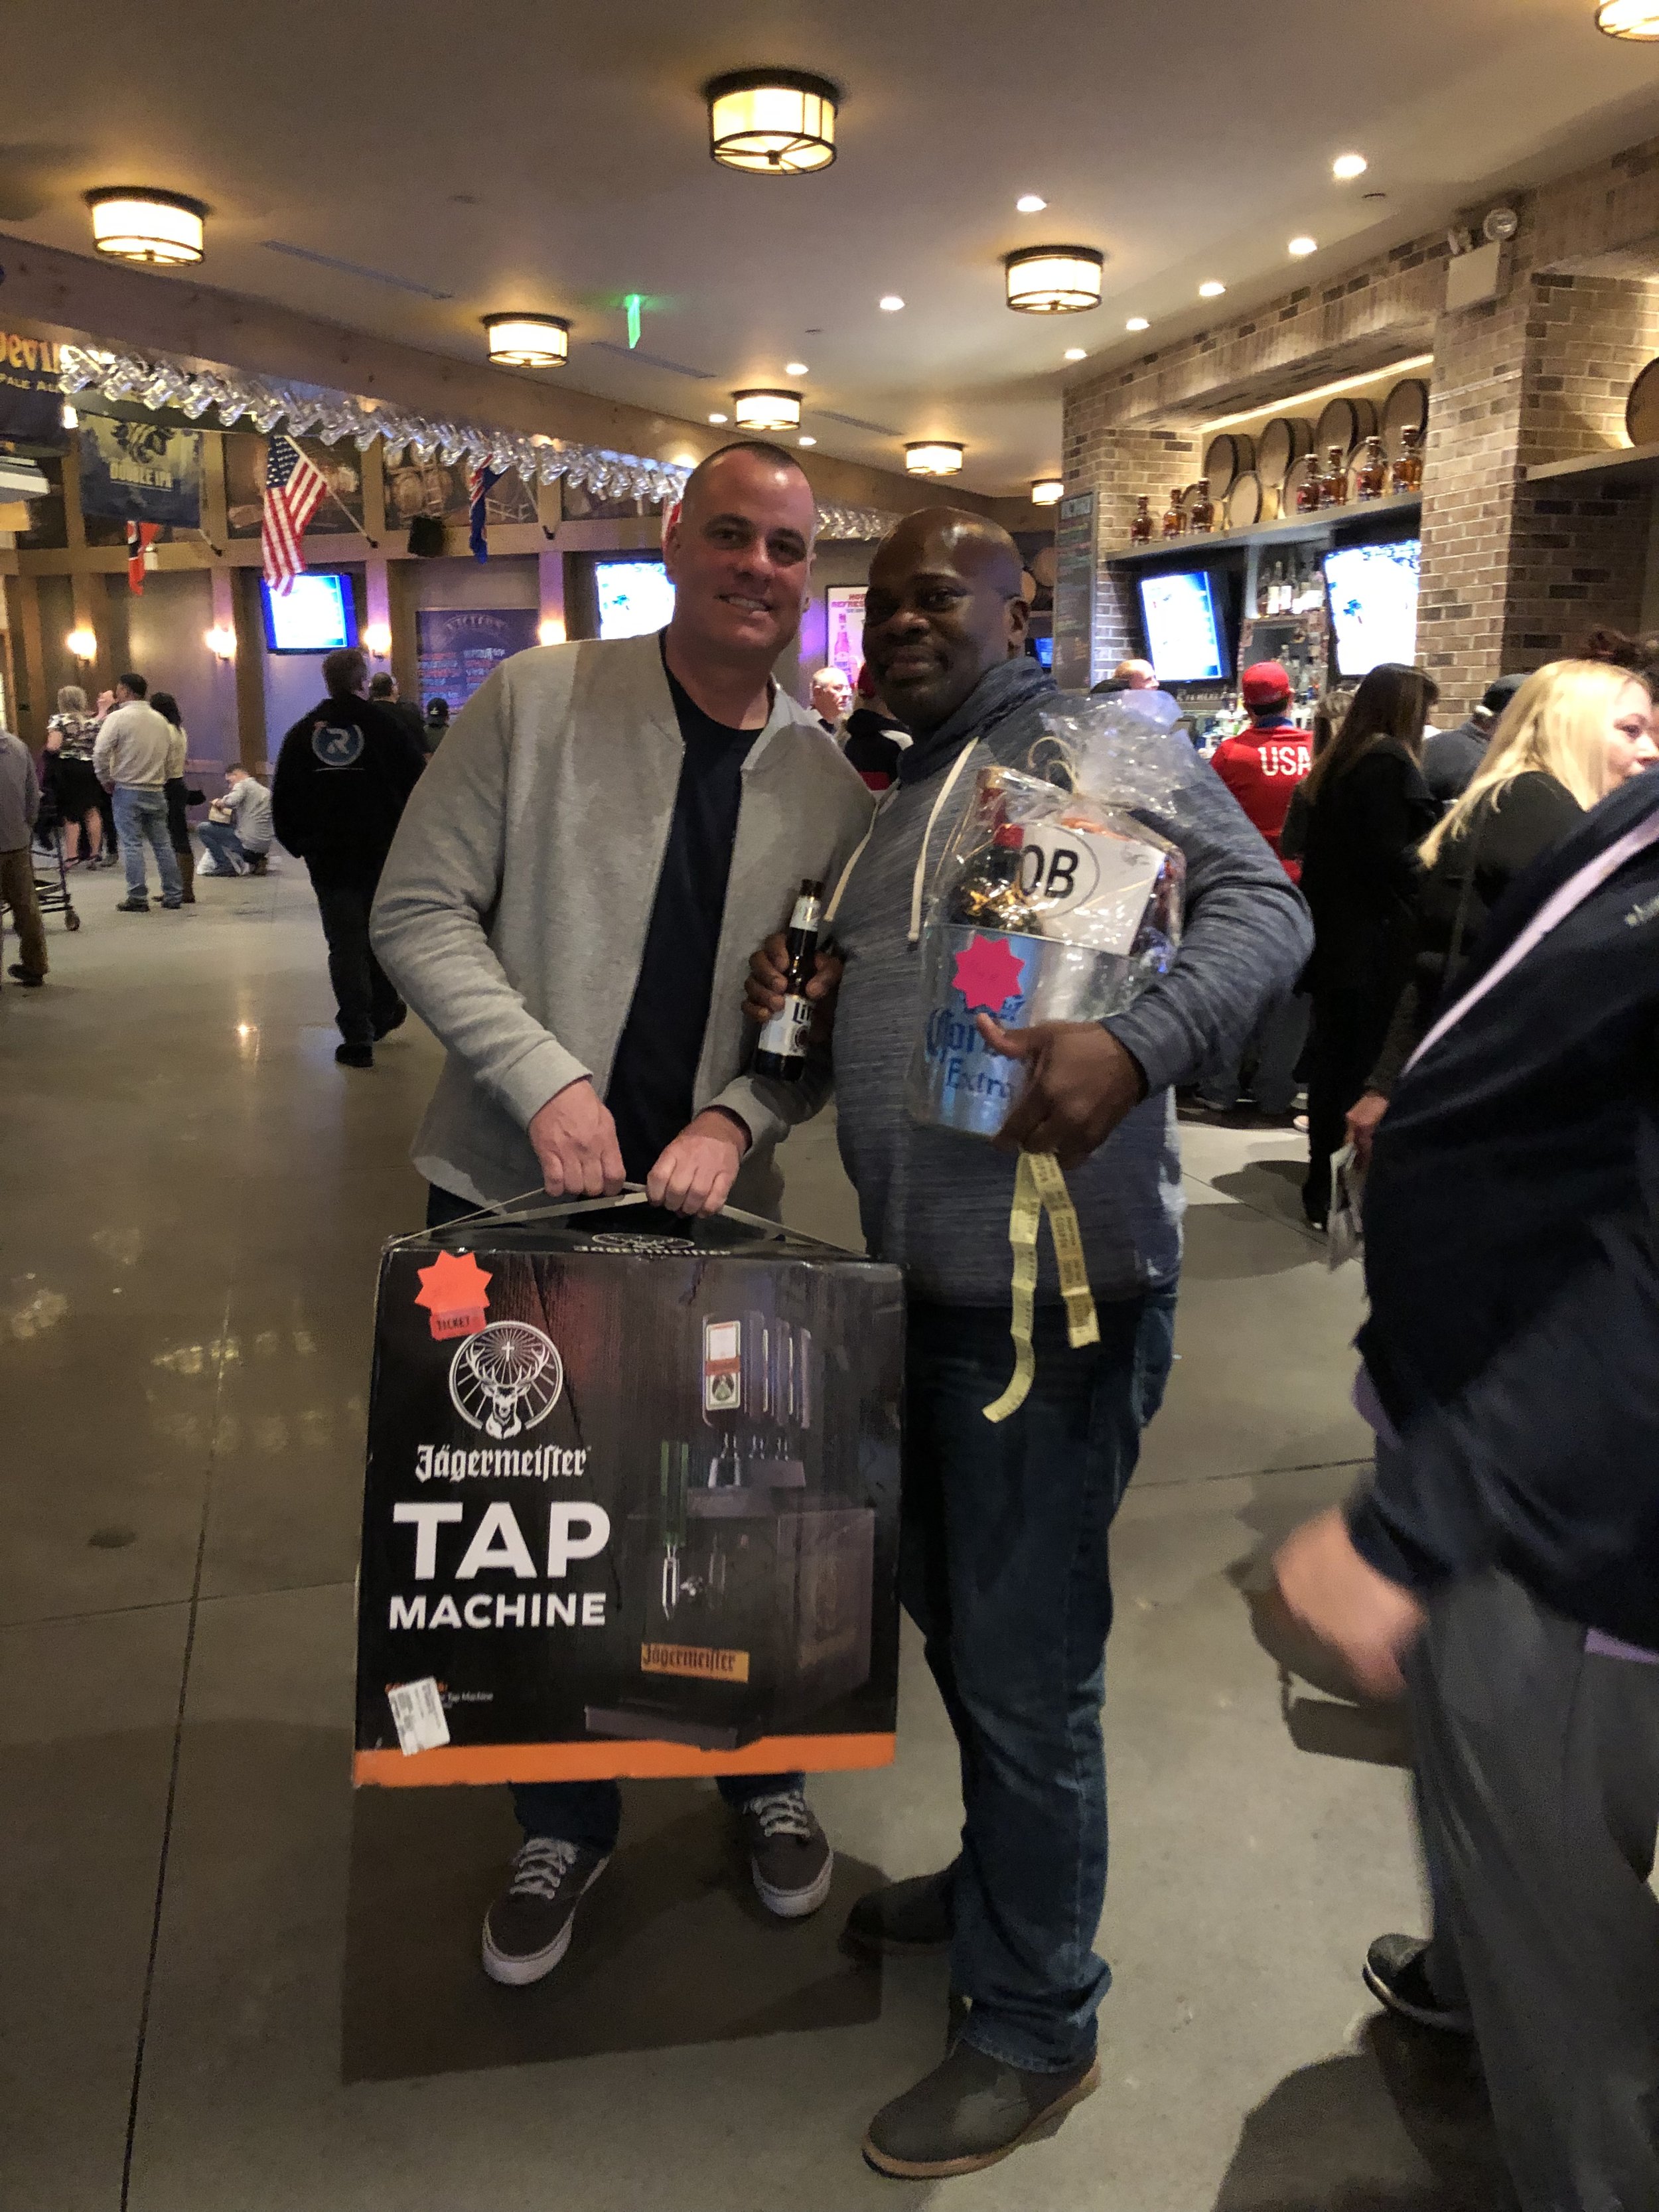  Liquor basket winner Donovan with double winner Jerry Malone who also took home a Jagermeister tap machine. 